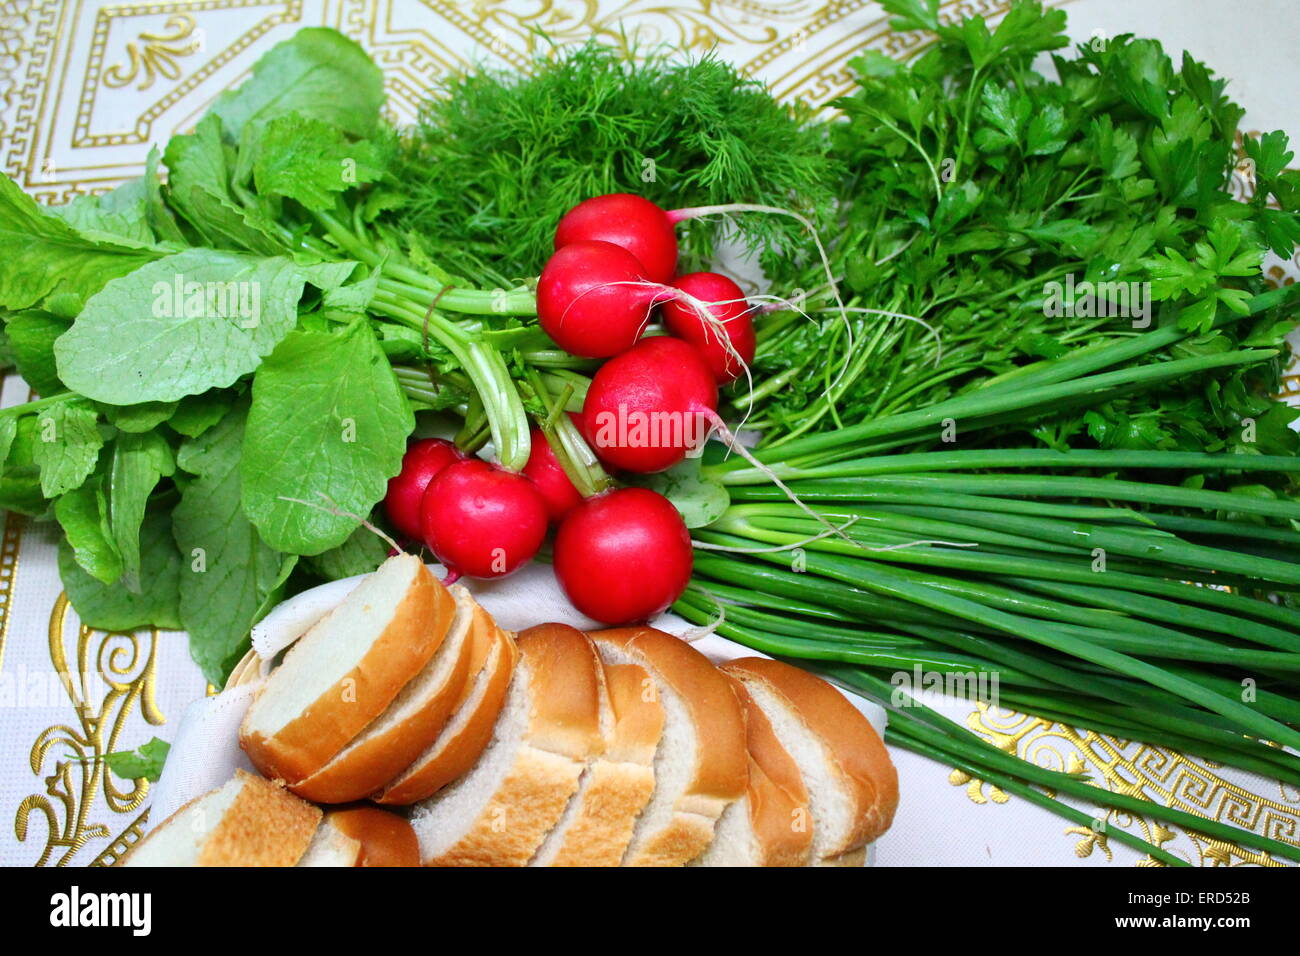 red ball shapes crust radish with leaves, green onion, tufts of aroma parsley and soft dill and piece of white bread Stock Photo